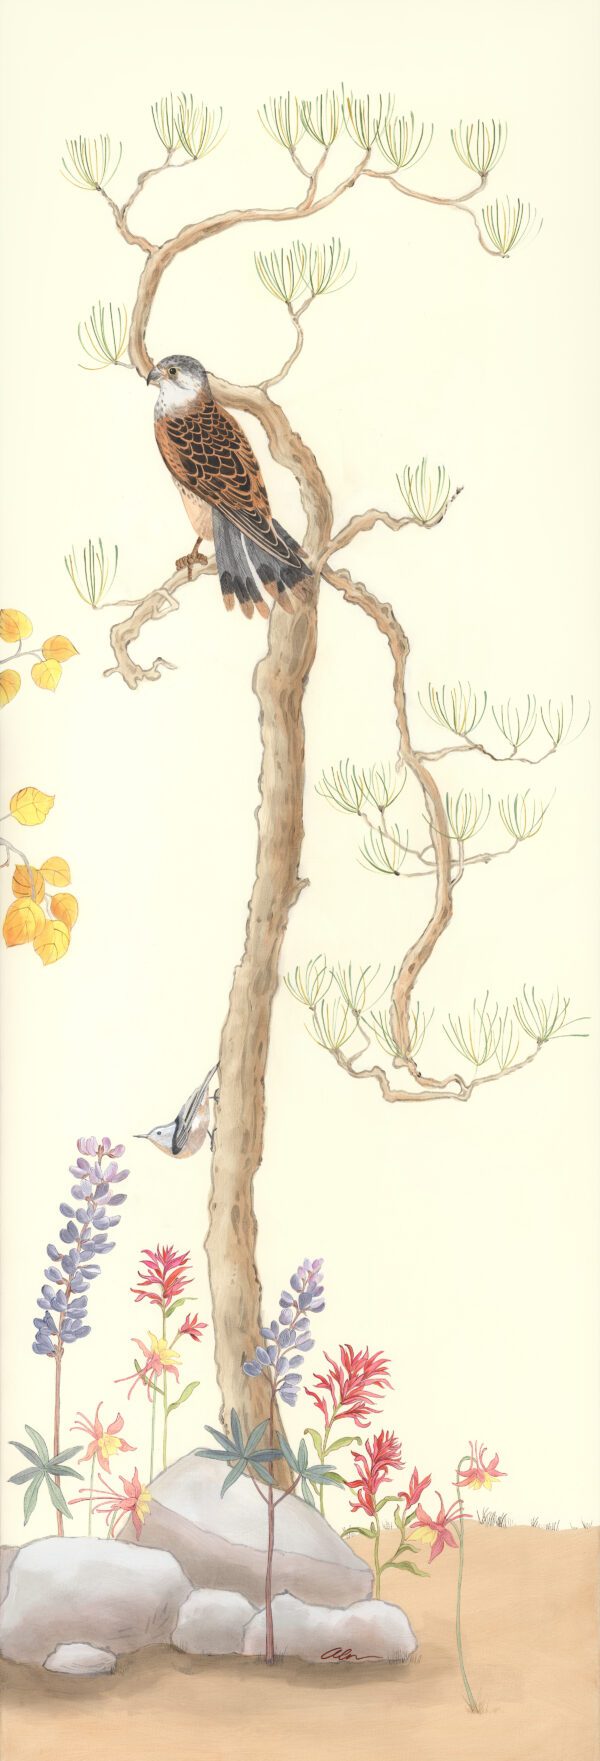 A scenic painting of a bird perched on a tree in a "Mountain Time" scenic mountain landscape setting.